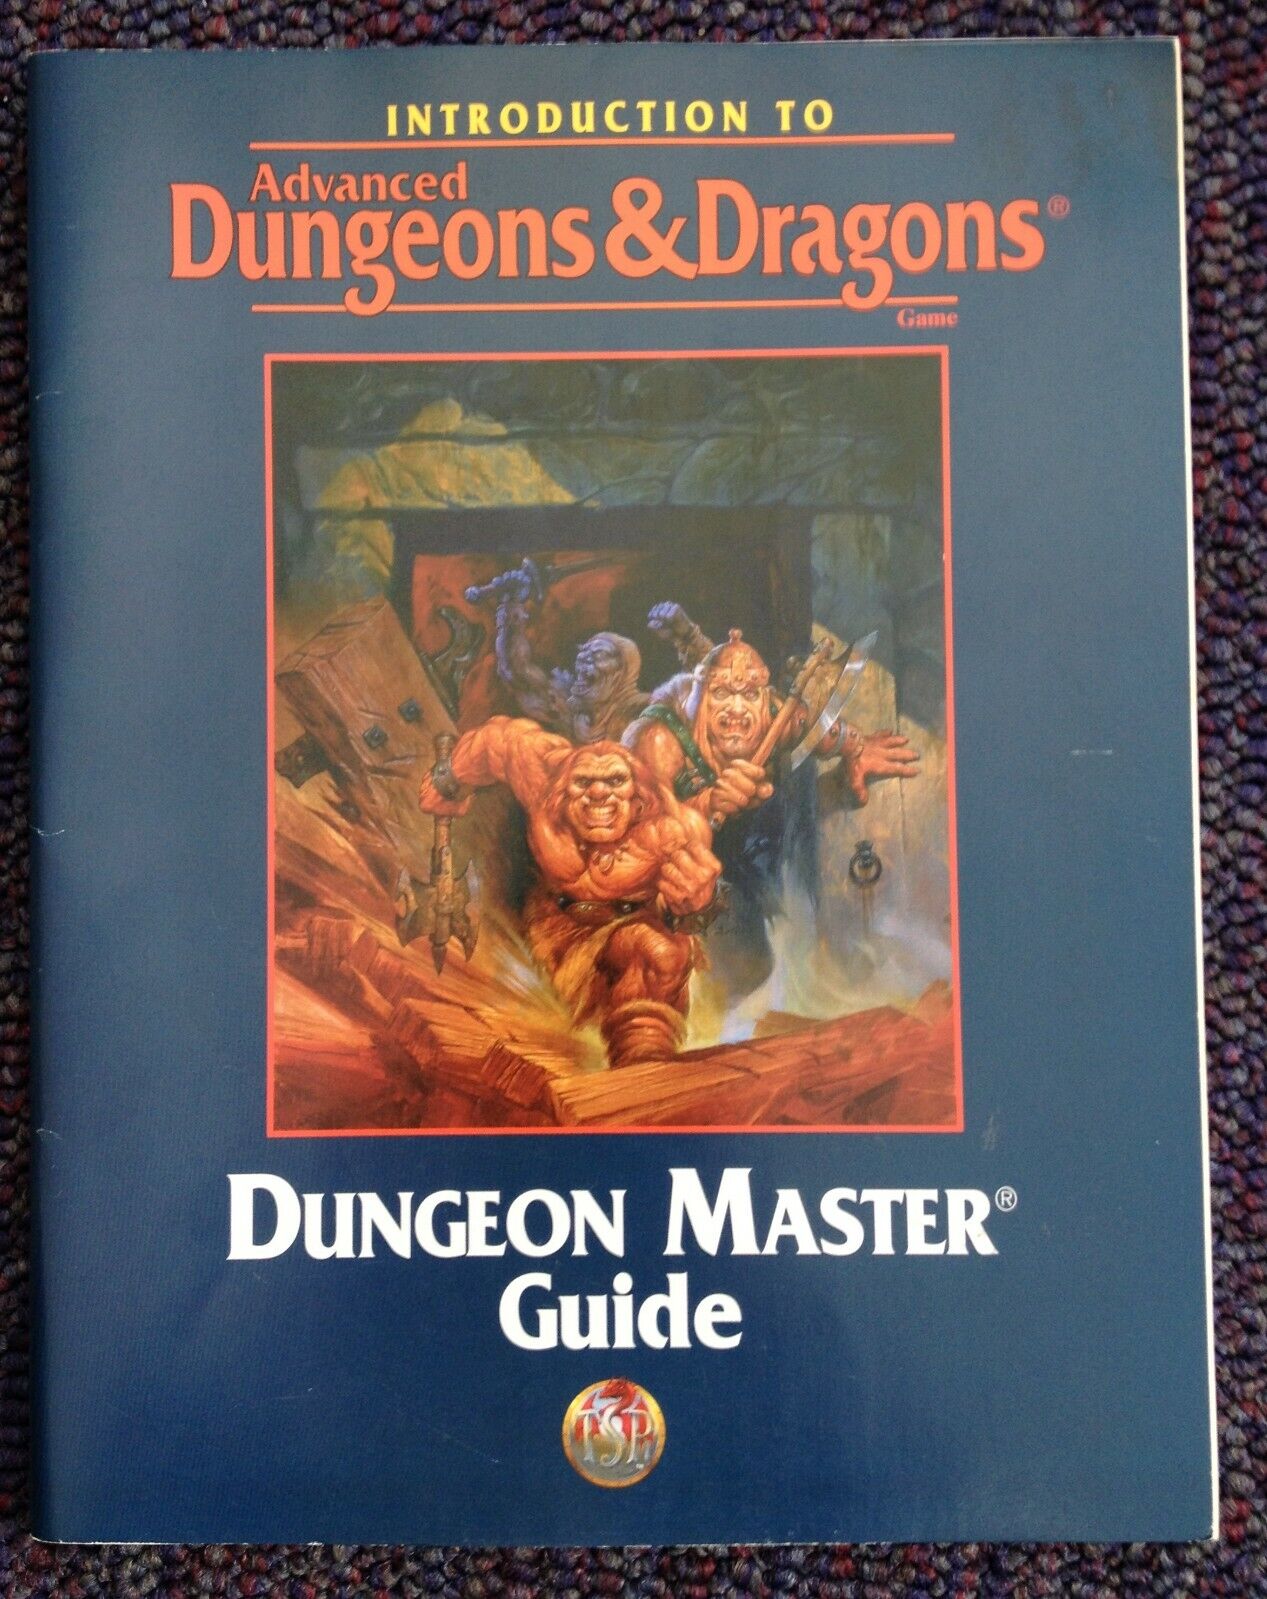 Dungeon Master Guide Introduction to Advanced Dungeons & Dragons 2nd Edition